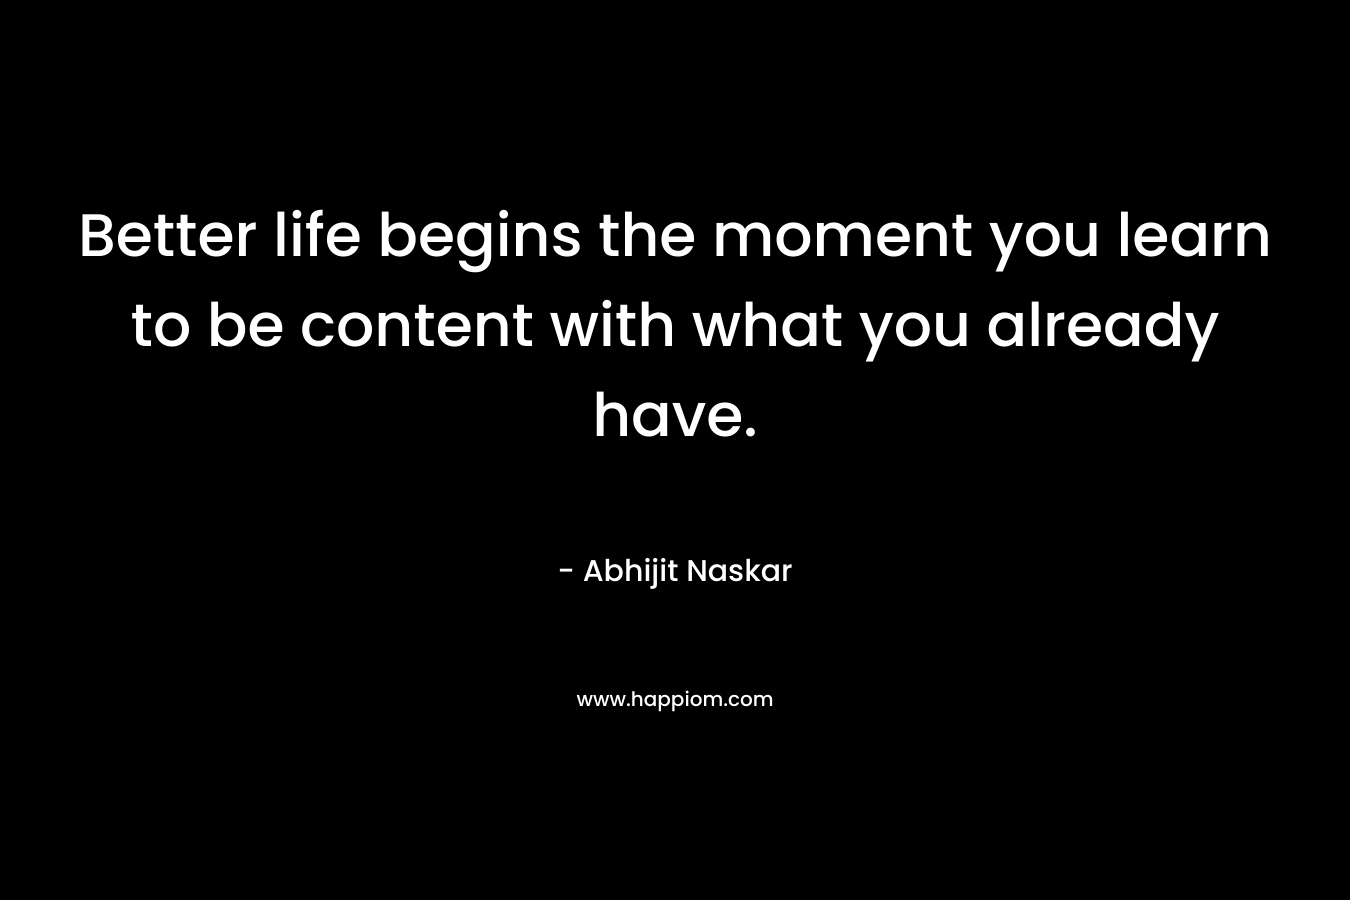 Better life begins the moment you learn to be content with what you already have.